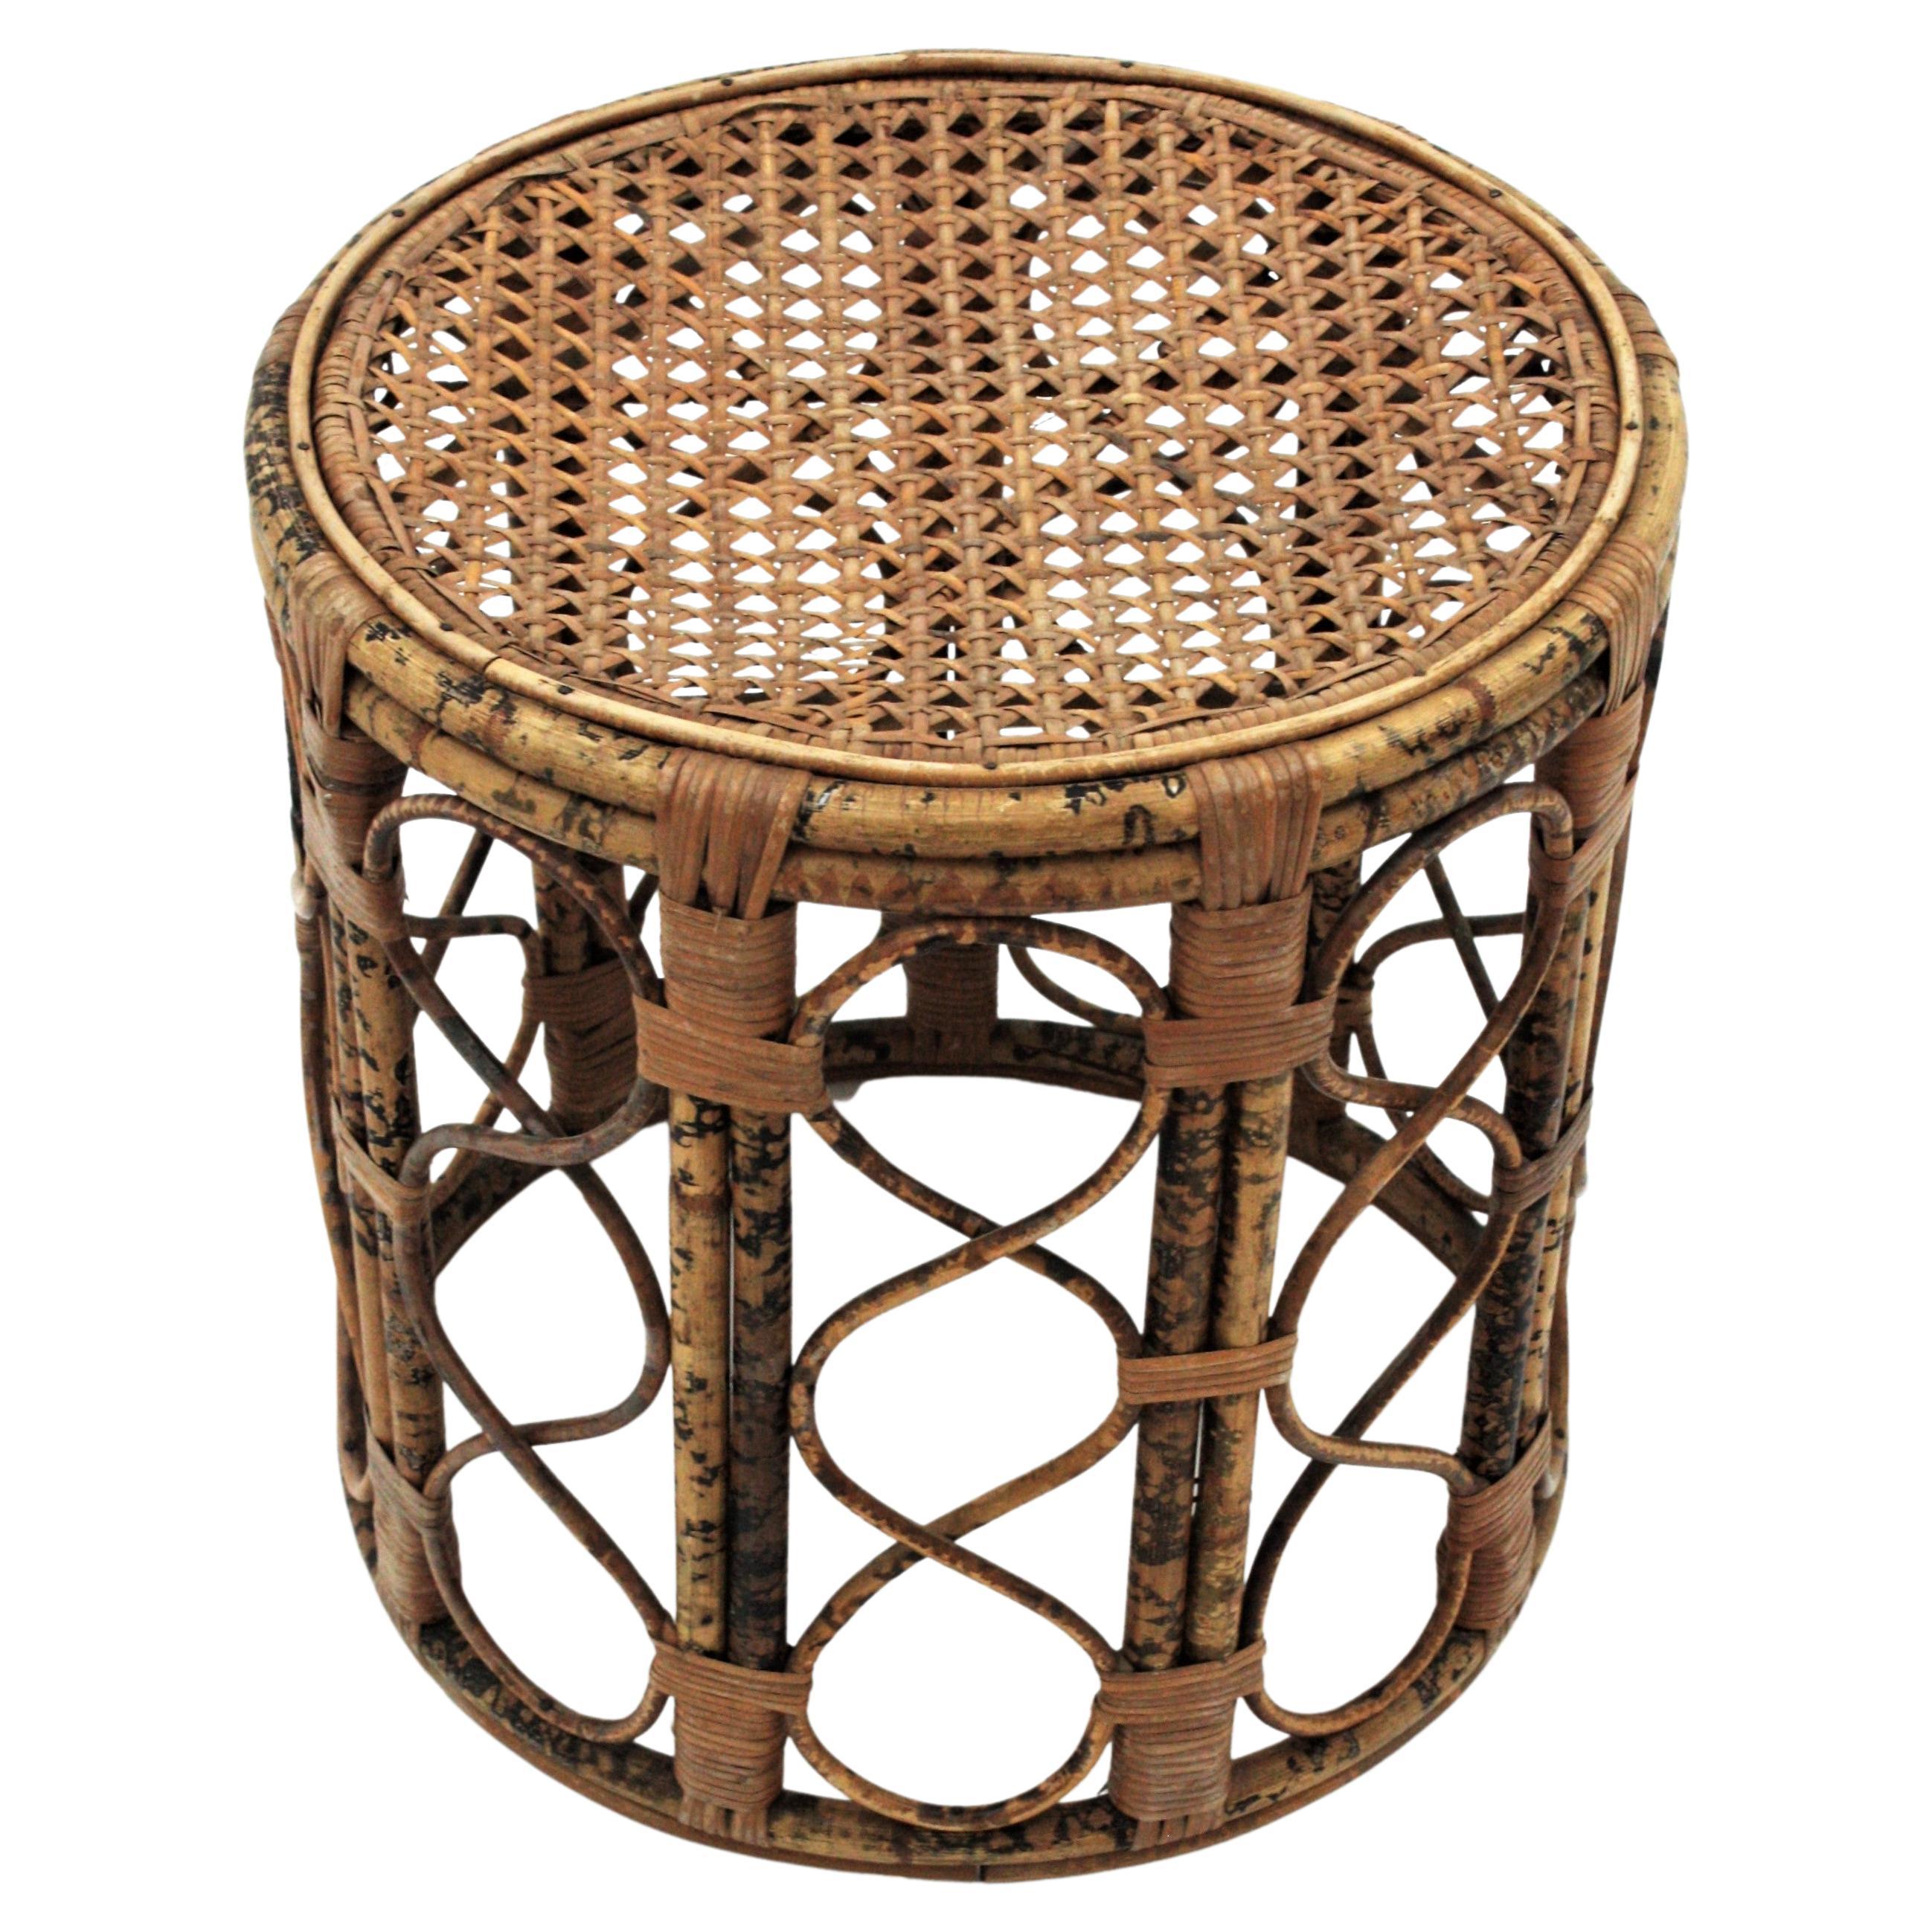 French Side Table or Stool in Tiger Bamboo Rattan with Woven Wicker Top, 1940s For Sale